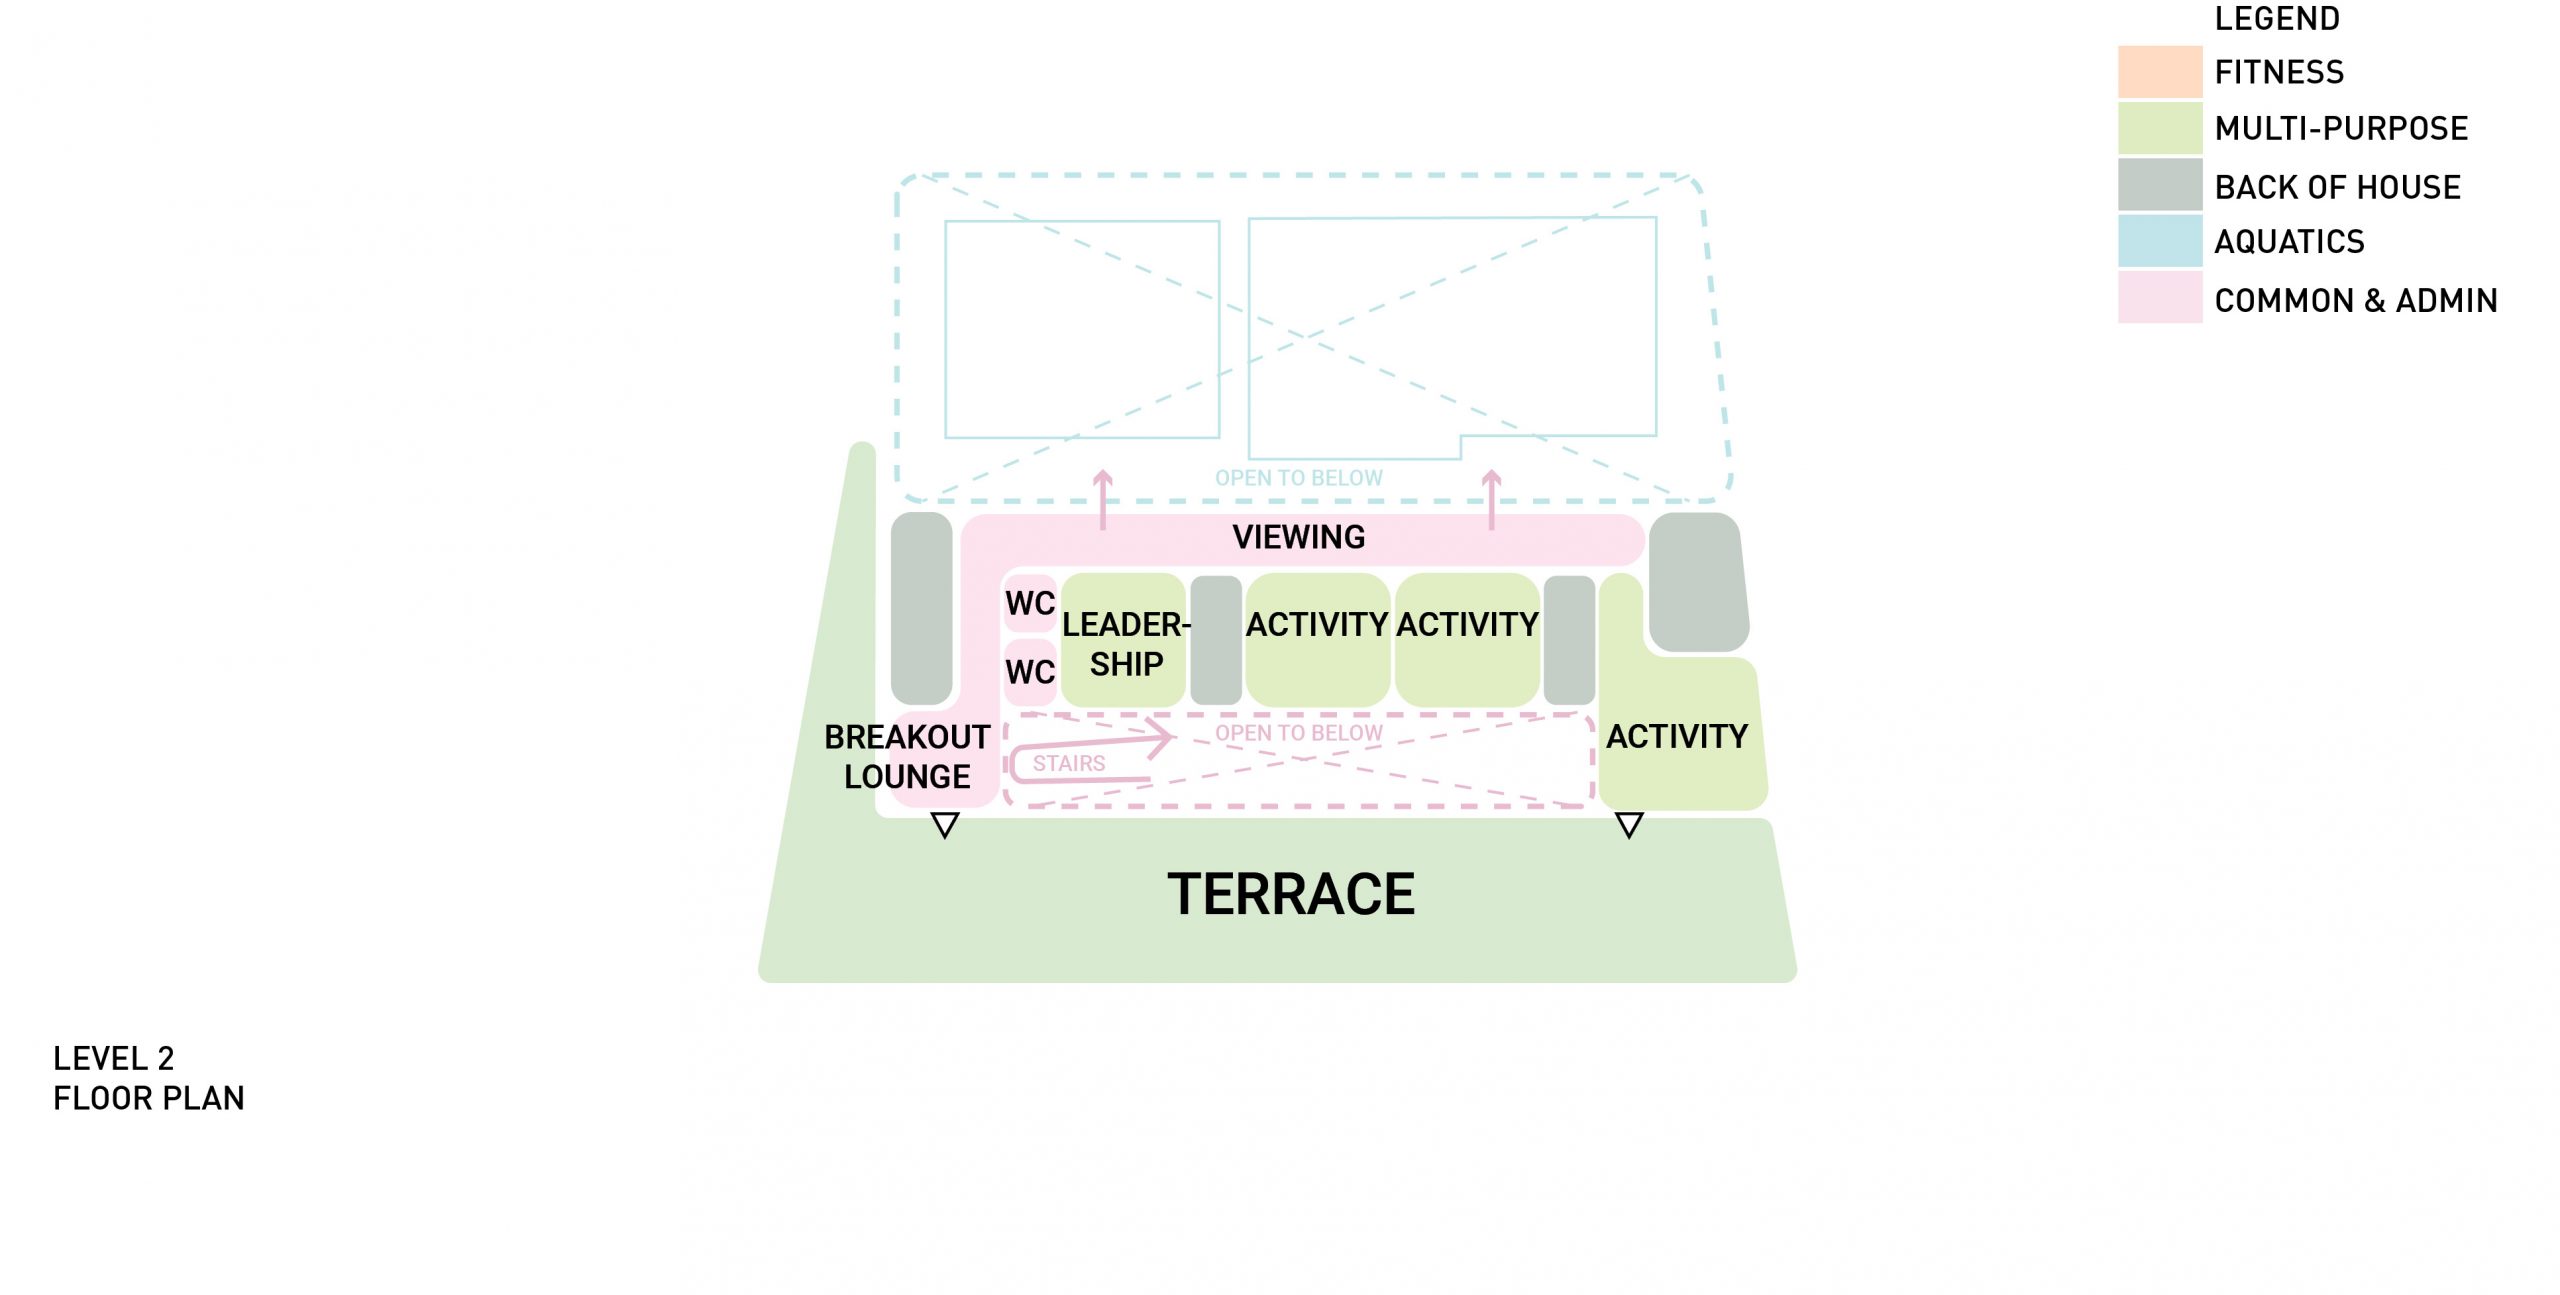 Plan diagram detailing the program relationships at the second floor. An access corridor with viewing into the aquatic hall is at the north. Below the corridor are the activity rooms with views into the atrium space. The atrium itself is booked ended by a breakout lounge and activity space which both provide access to an outdoor terrace at the south.